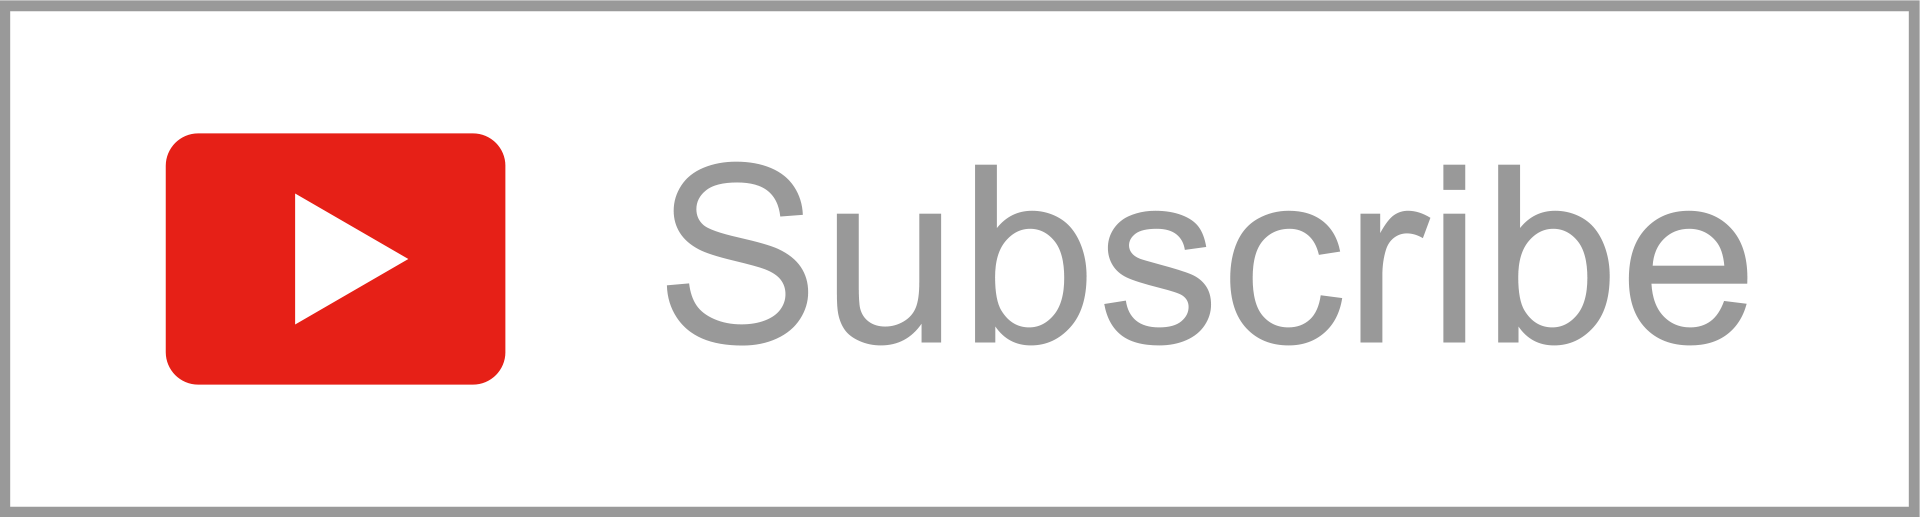 Free-Outline-YouTube-Subscribe-Button-by-AlfredoCreates